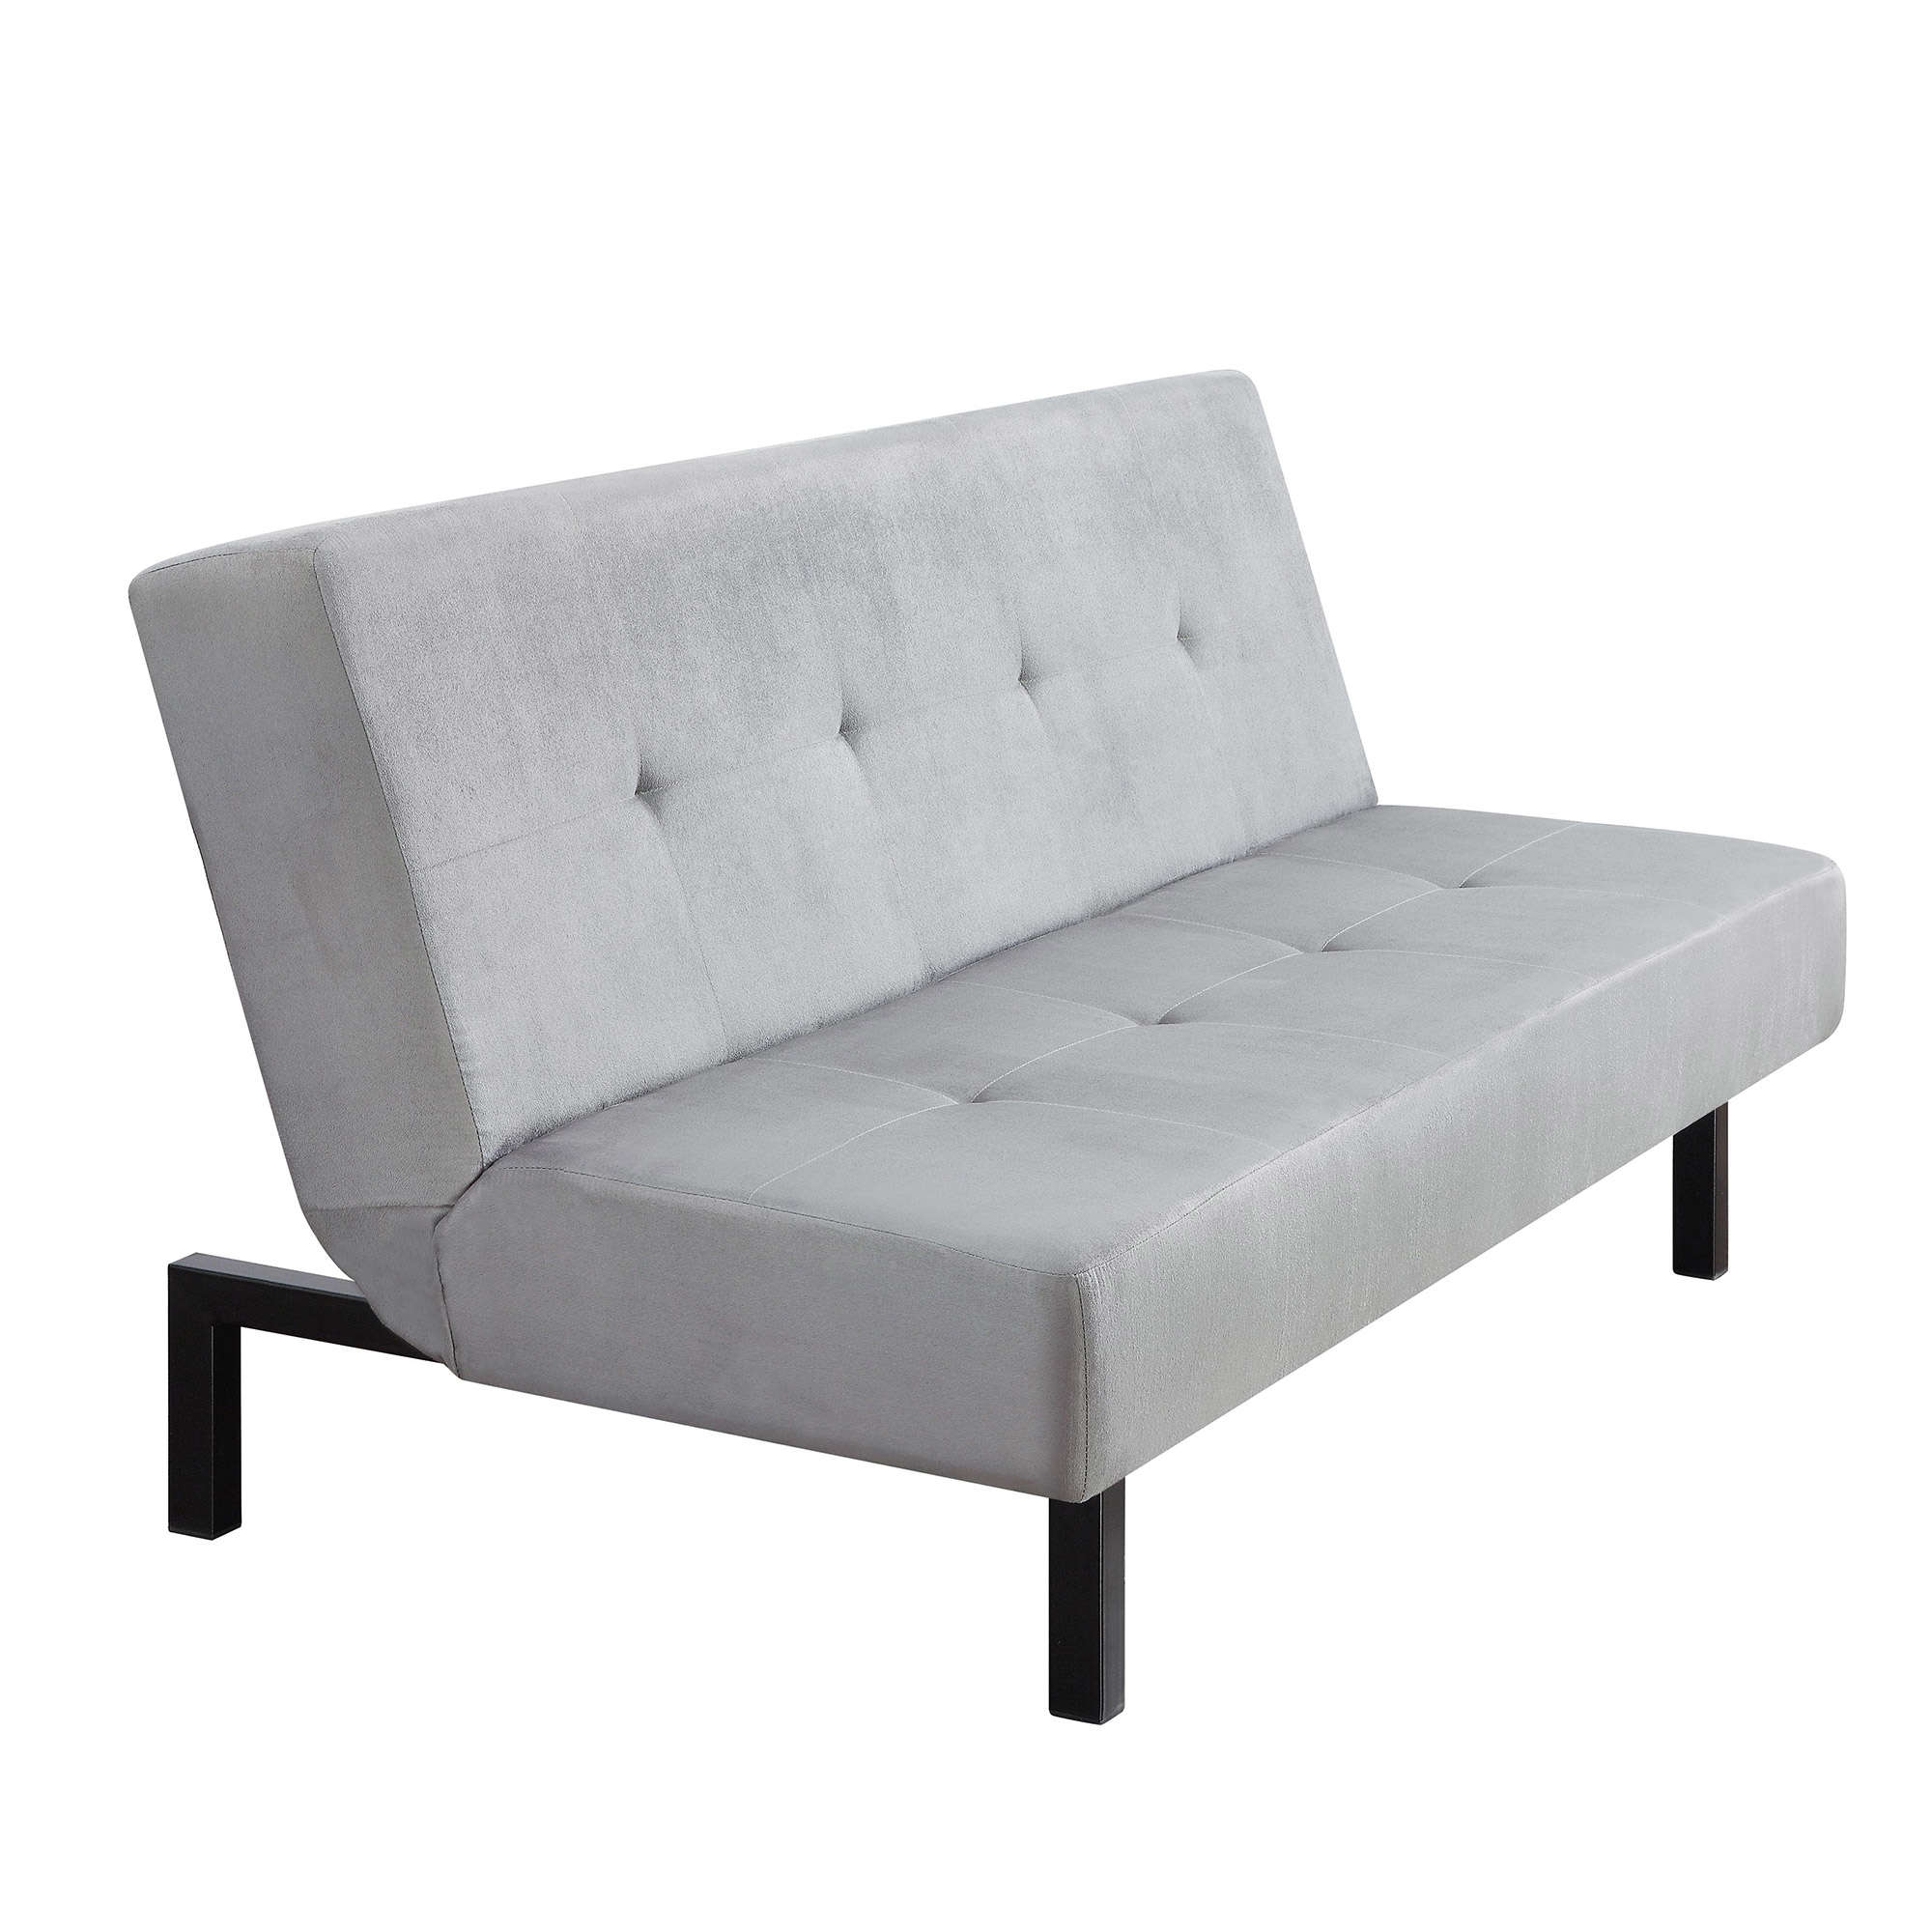 Mainstays 68? 3-Position Tufted Futon, Gray - image 4 of 6